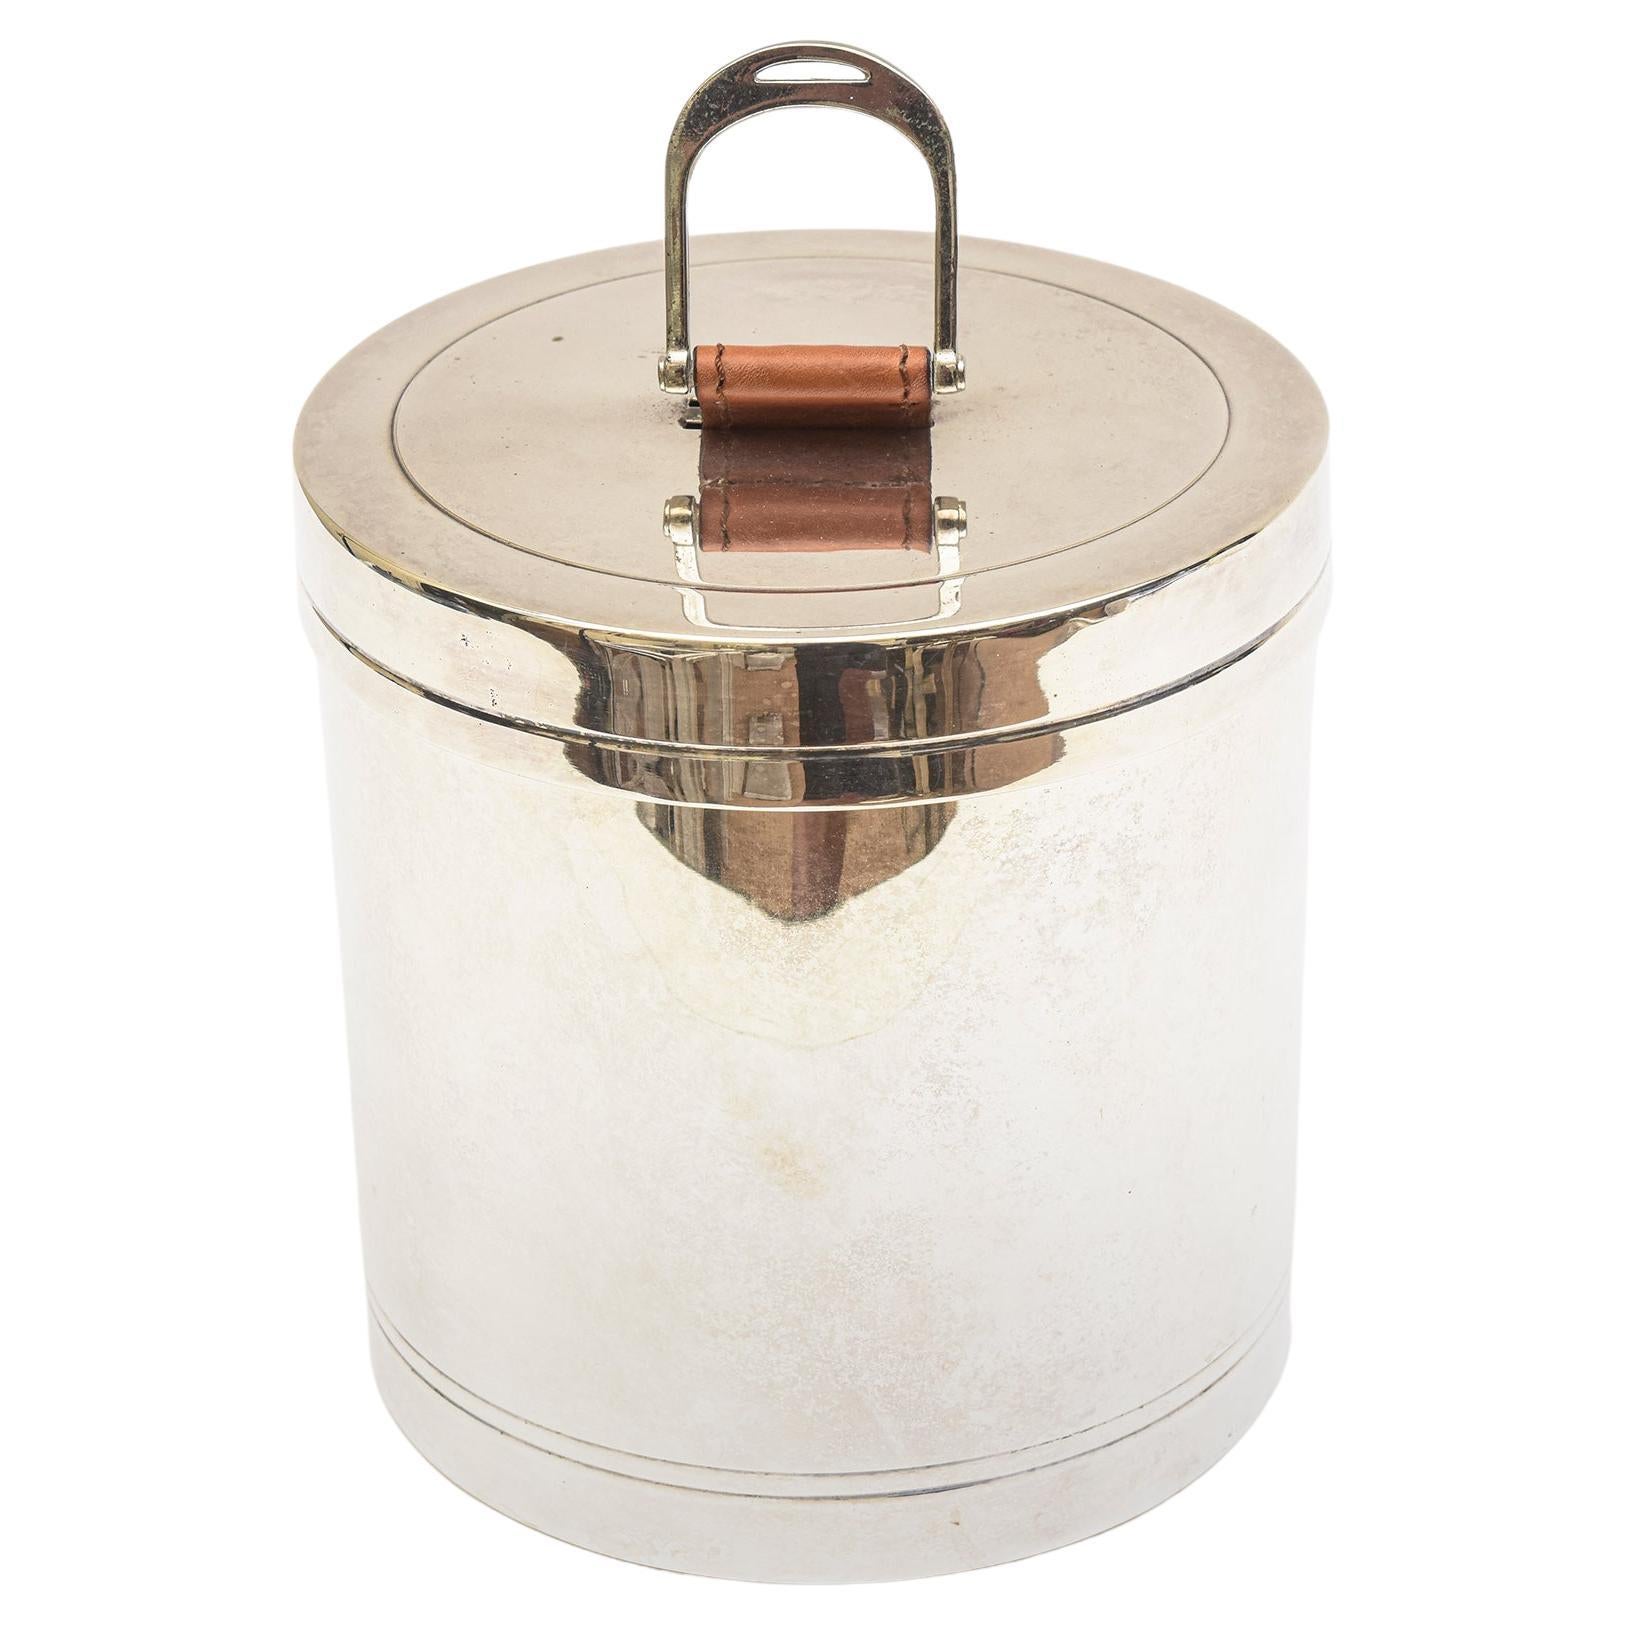 This round silver plate ice bucket by Ralph Lauren from the 1990s has a combination tan leather pull handle on top with a silver plate pull. It can stand up if you push the leather down. The front of the ice bucket has a shield emblem with 3 tiny